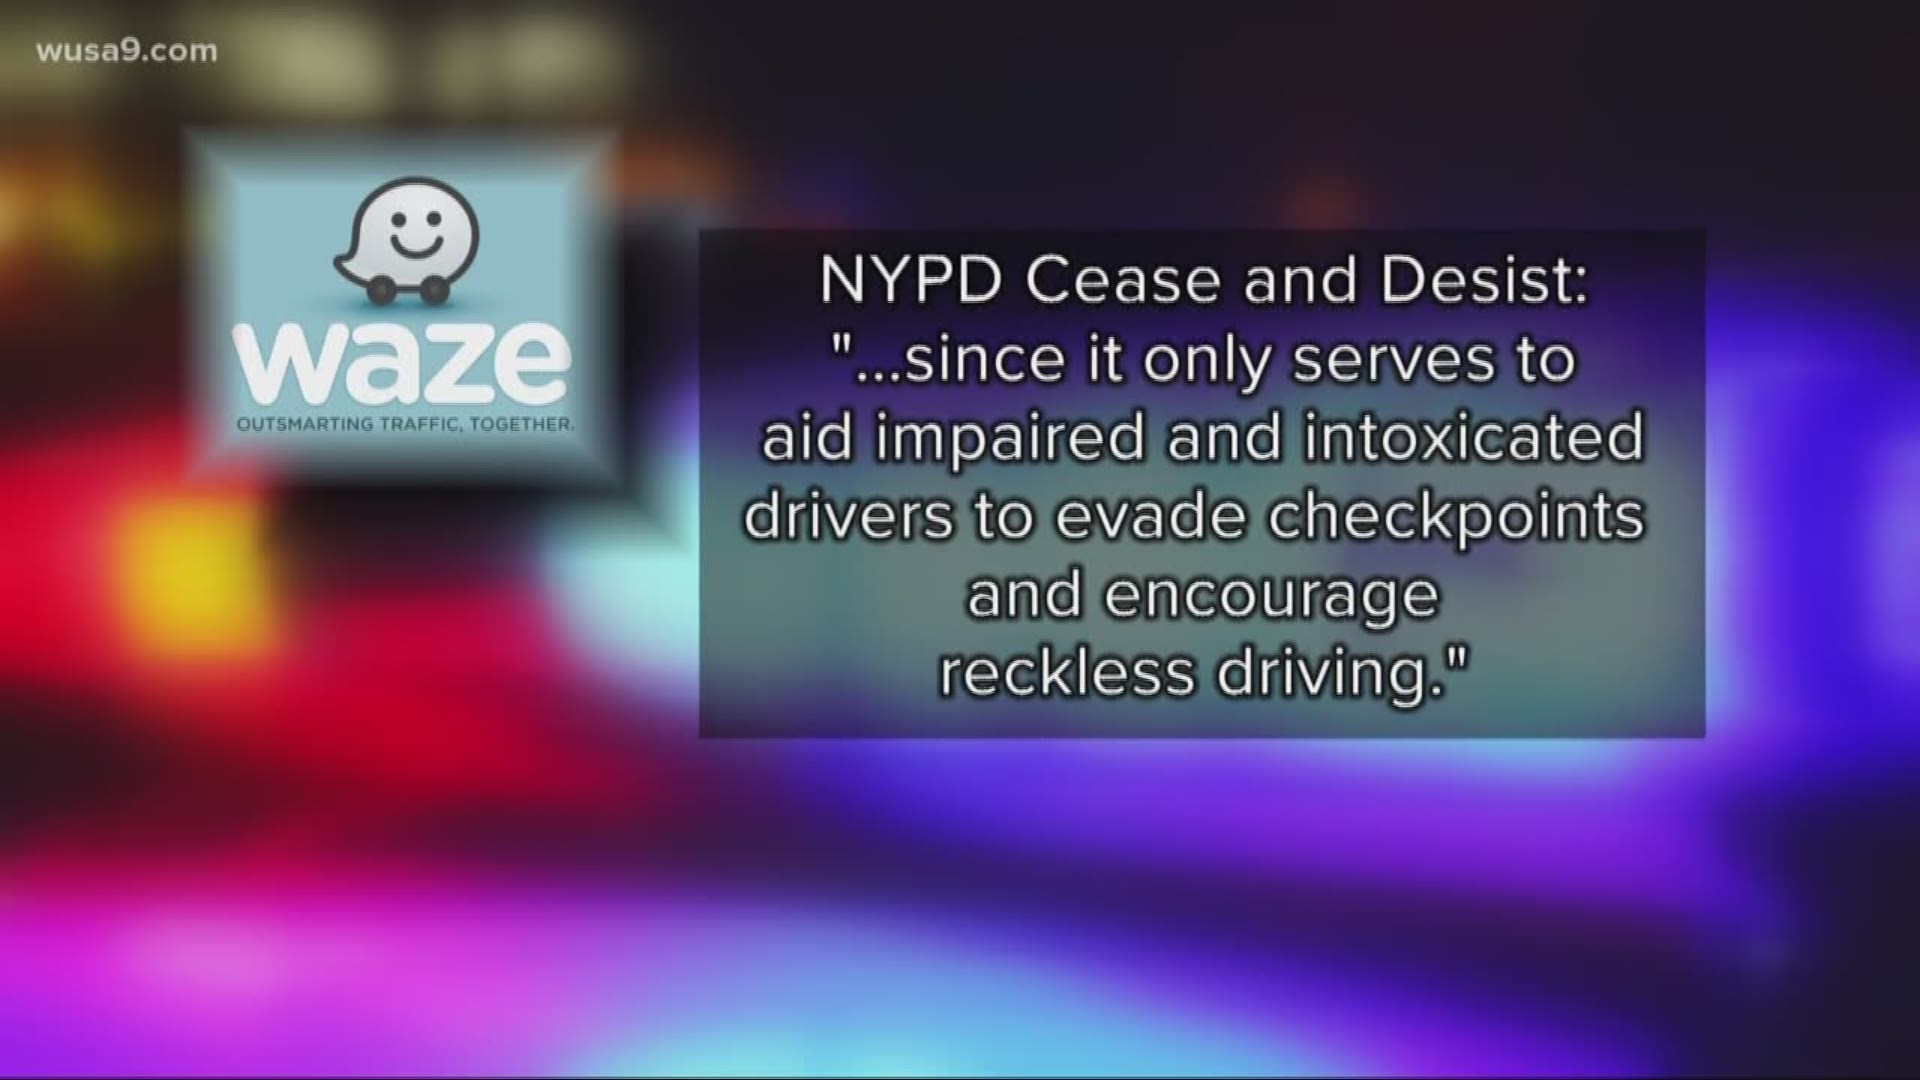 New York City has told Waze and its parent company Google to cease and desist with alerting users to Drunk Driving checkpoints. Waze says nothing has changed in the app, and local police say they have no objection.